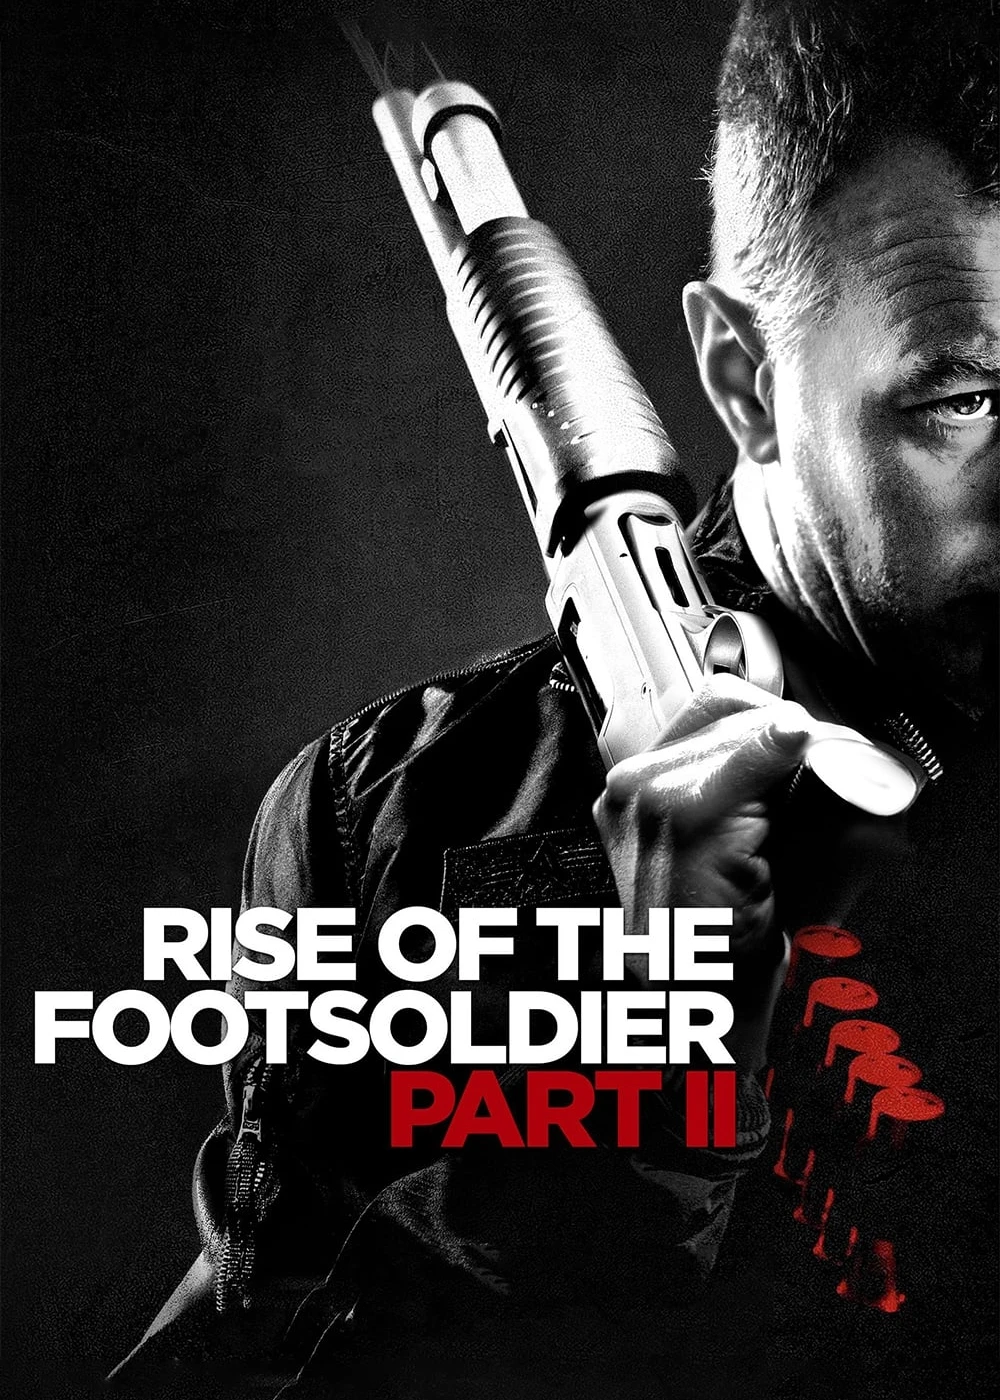 Rise of the Footsoldier Part II | Rise of the Footsoldier Part II (2015)